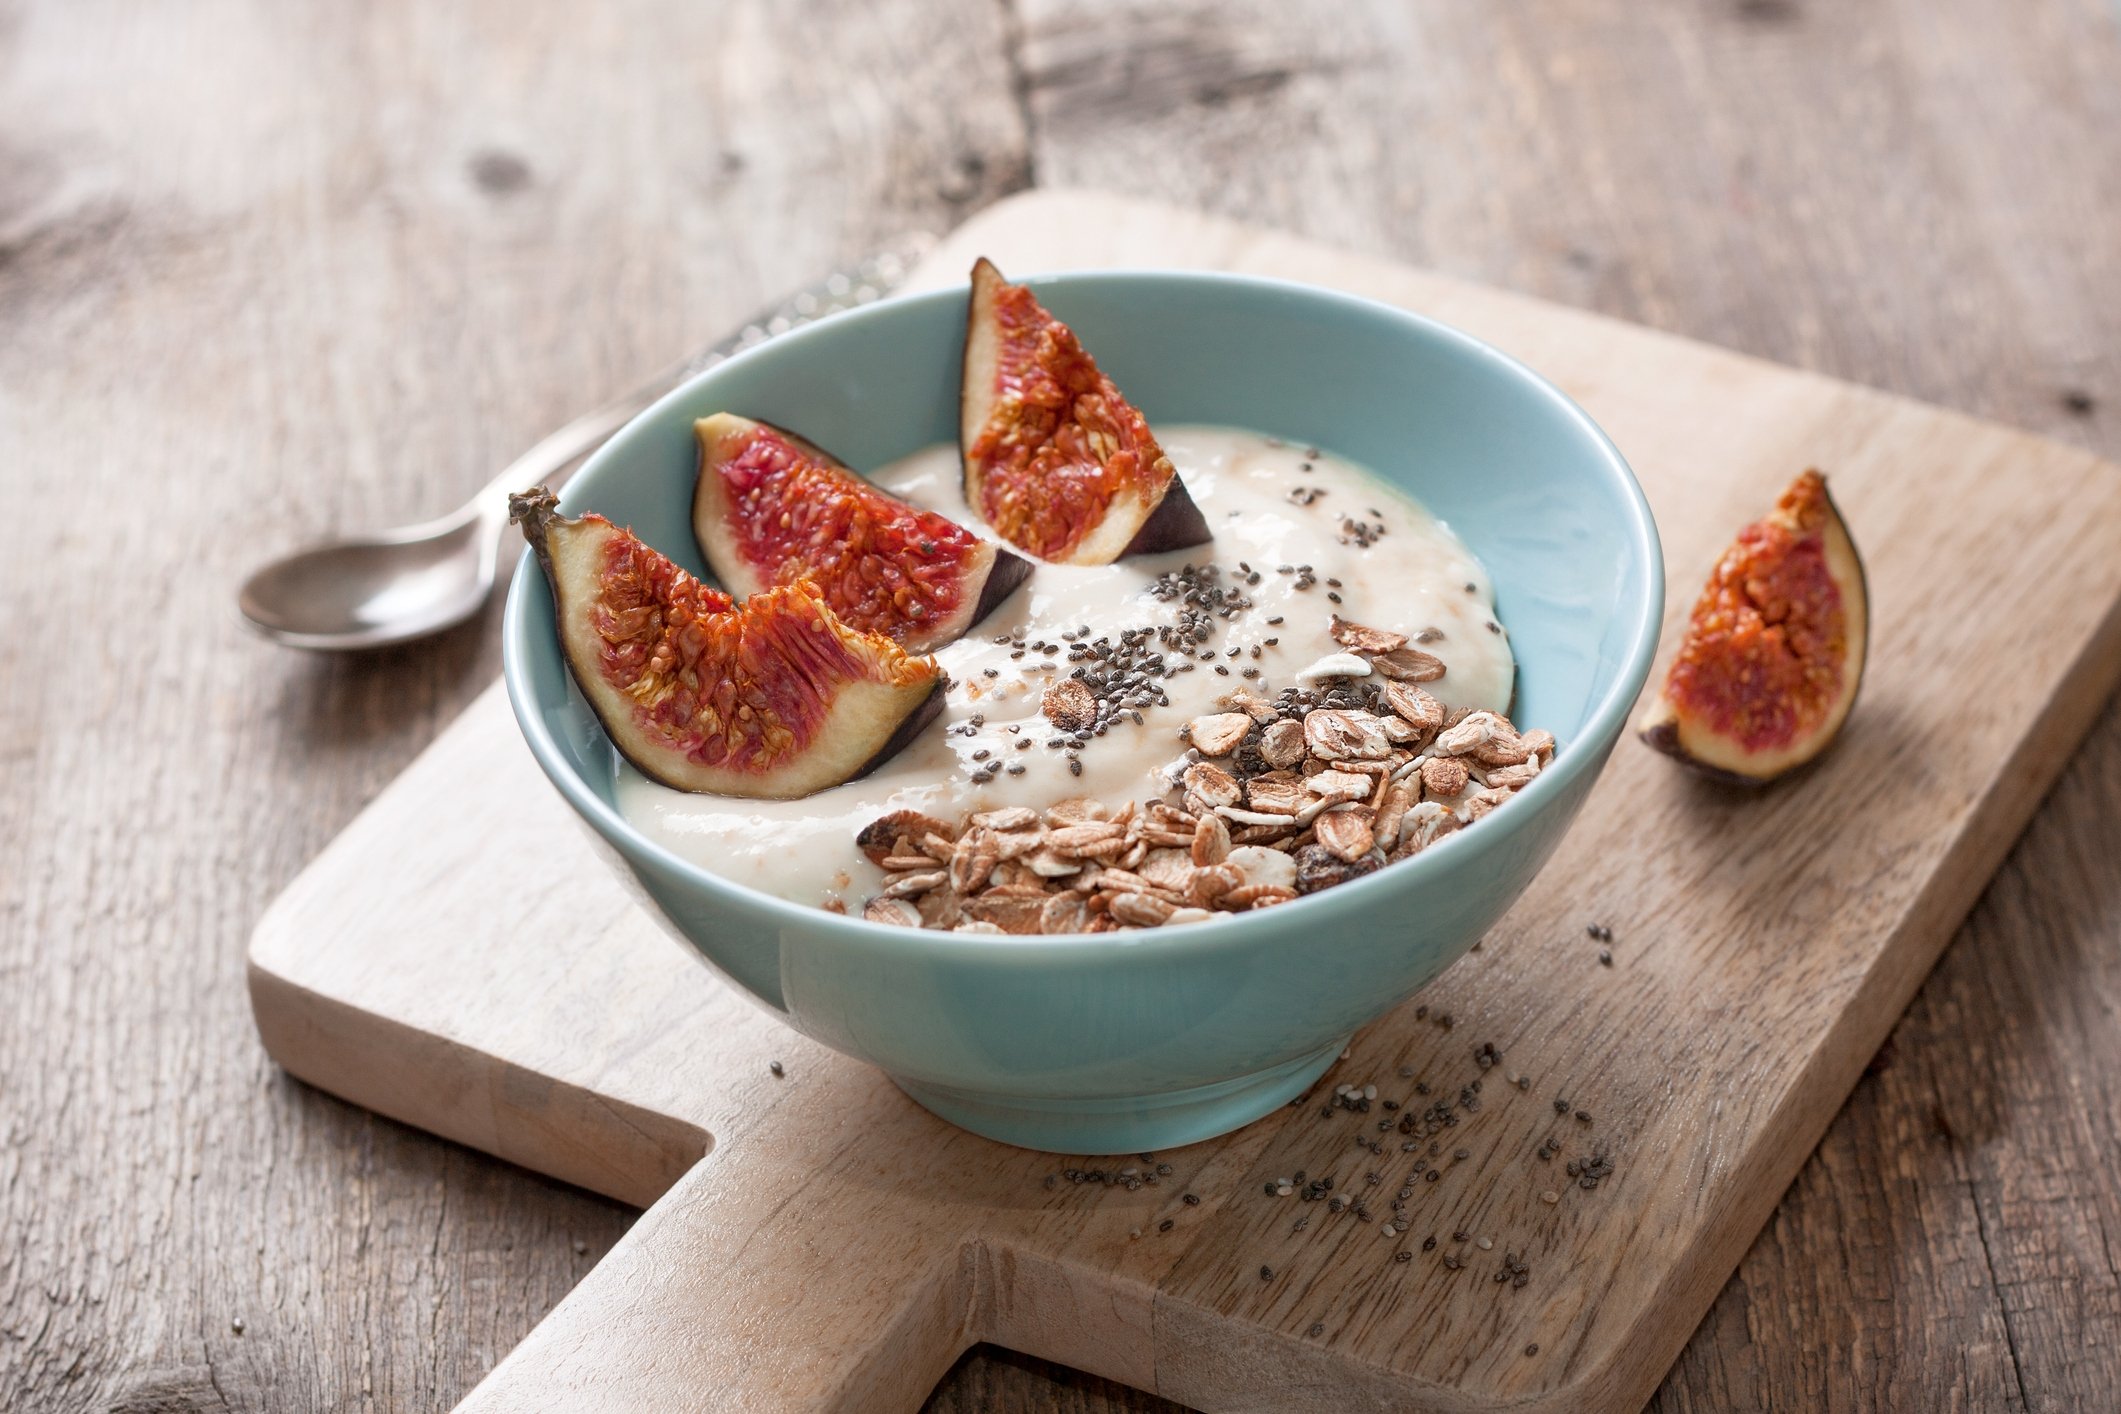 Figs make for a sweet and filling addition to your morning oatmeal. (iStock Photo)